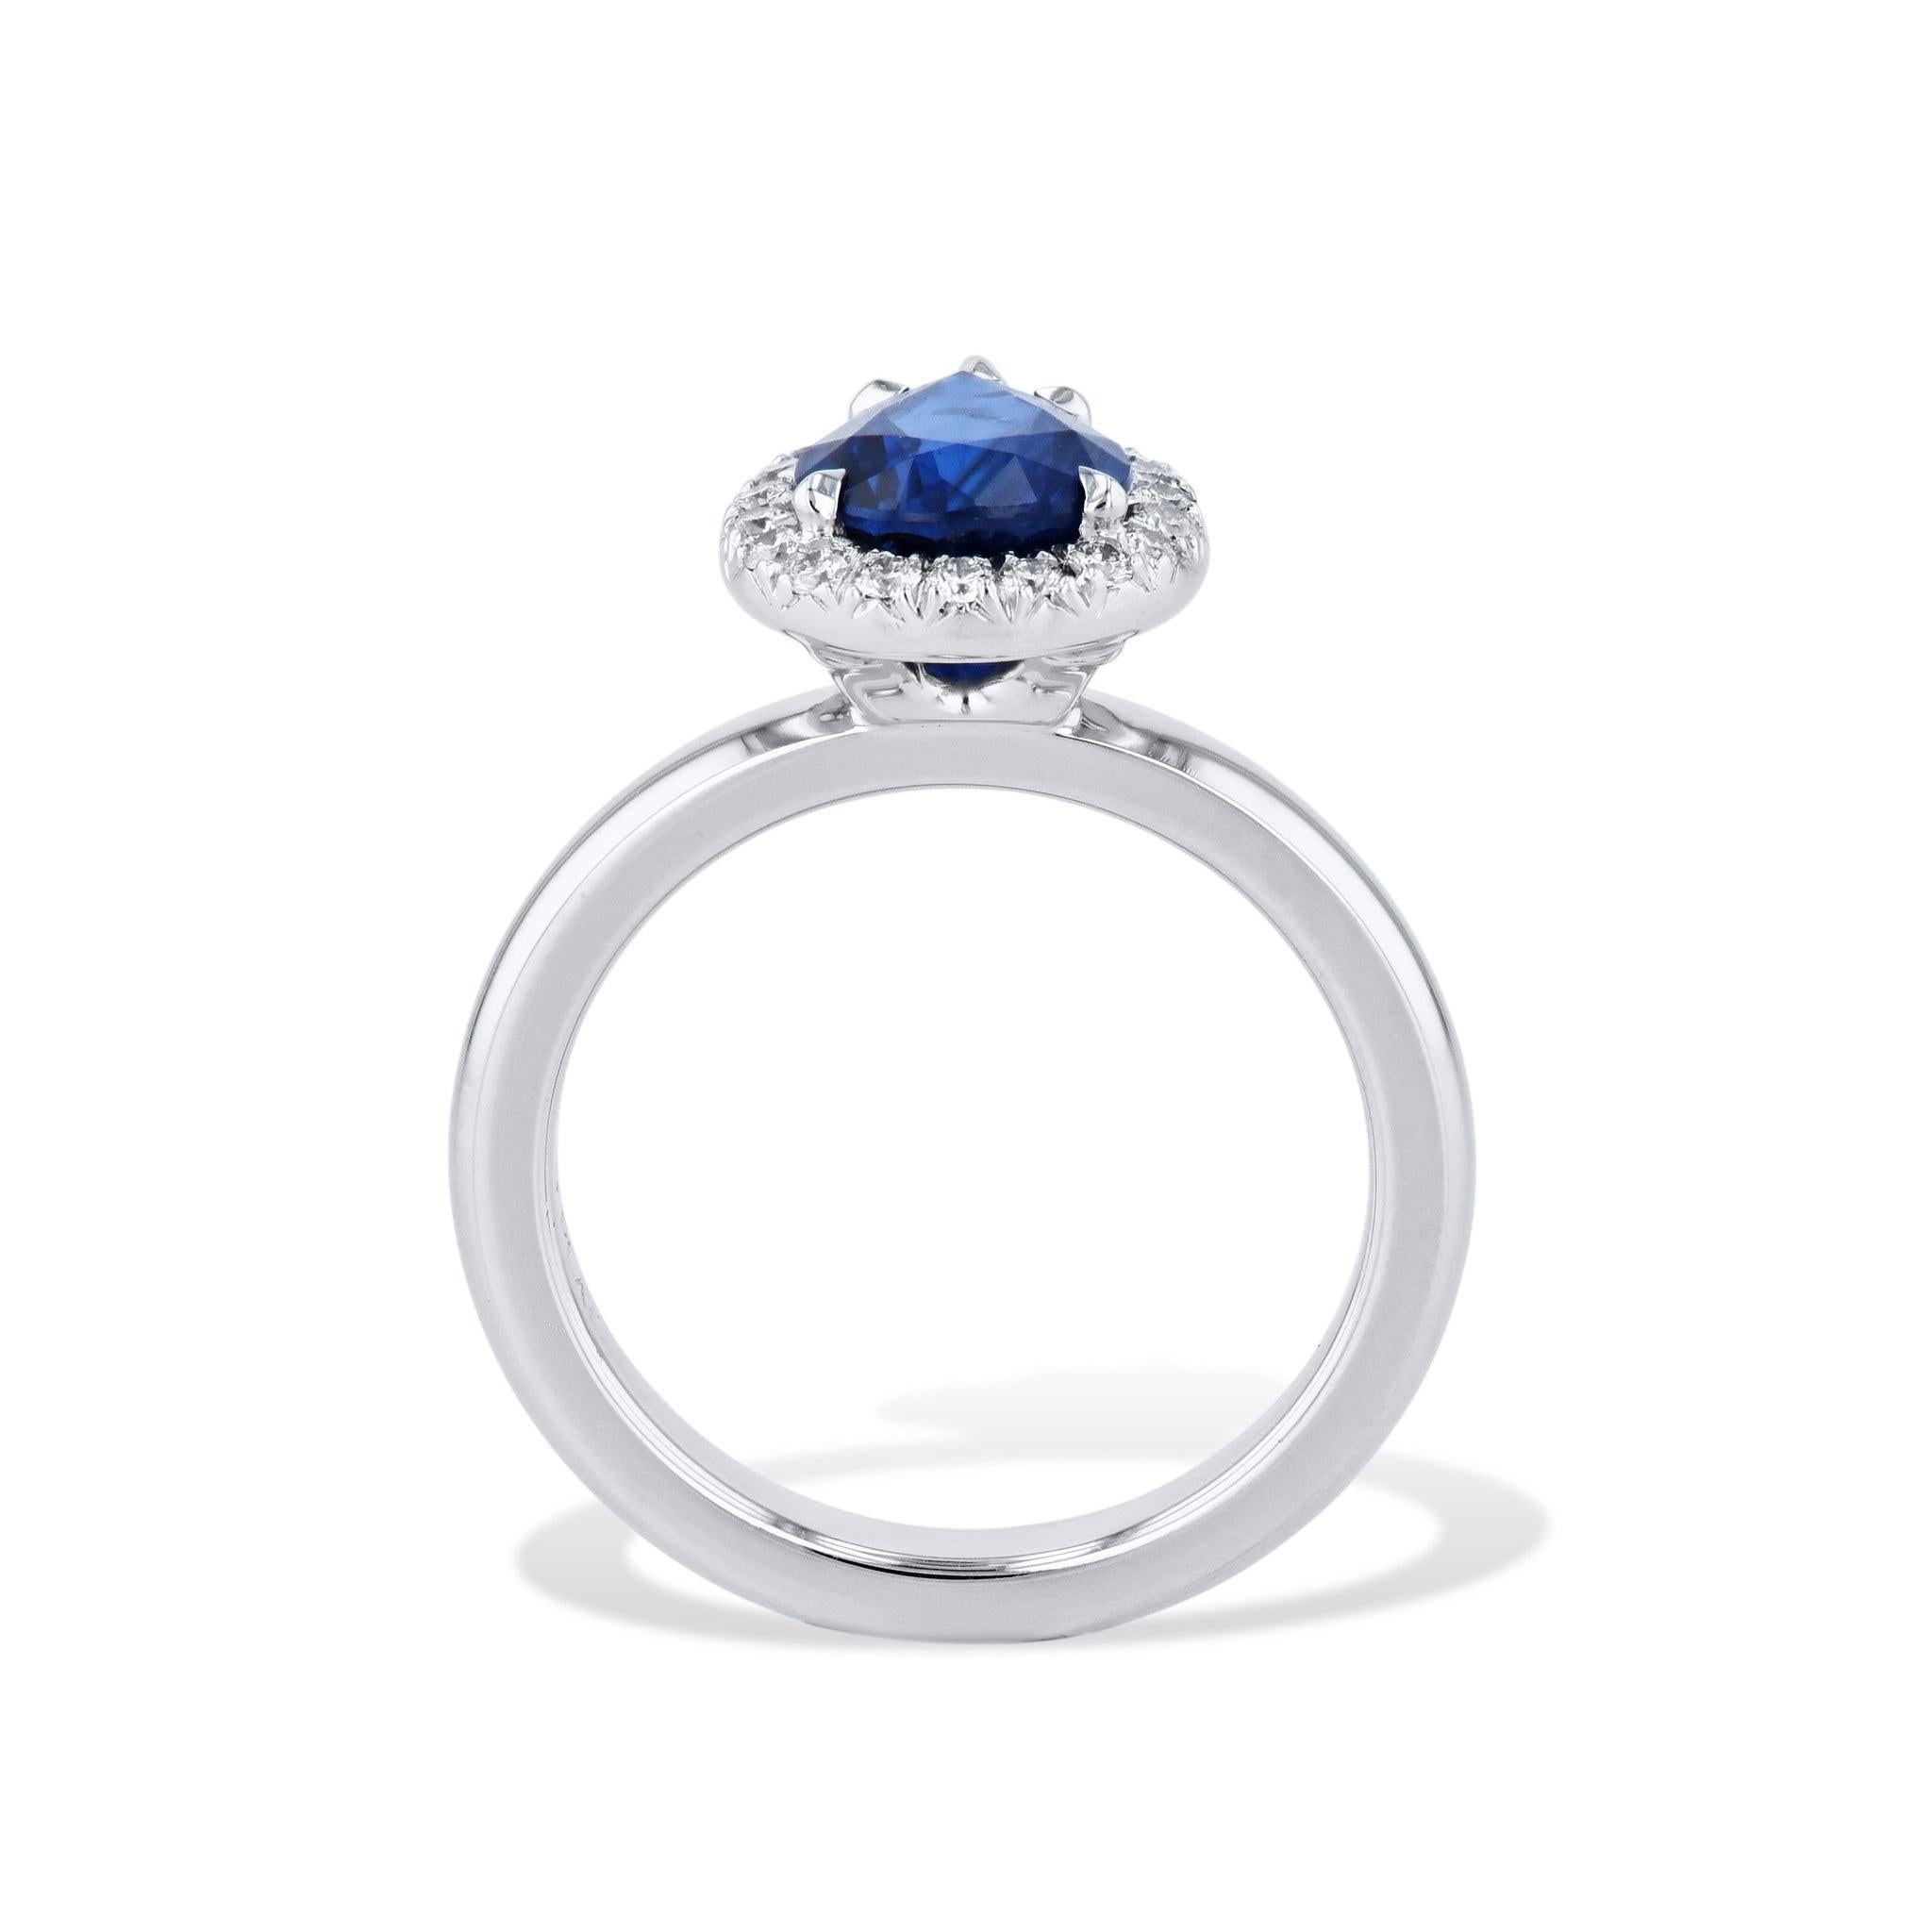 
This is a stunning royal blue pear shaped sapphire pave diamond platinum ring! 
The pear shape sapphire in the center is 1.89 carats. There are an additional 20 dazzling diamonds totaling 0.18 carats that are H in color and VS1 in clarity. 
This